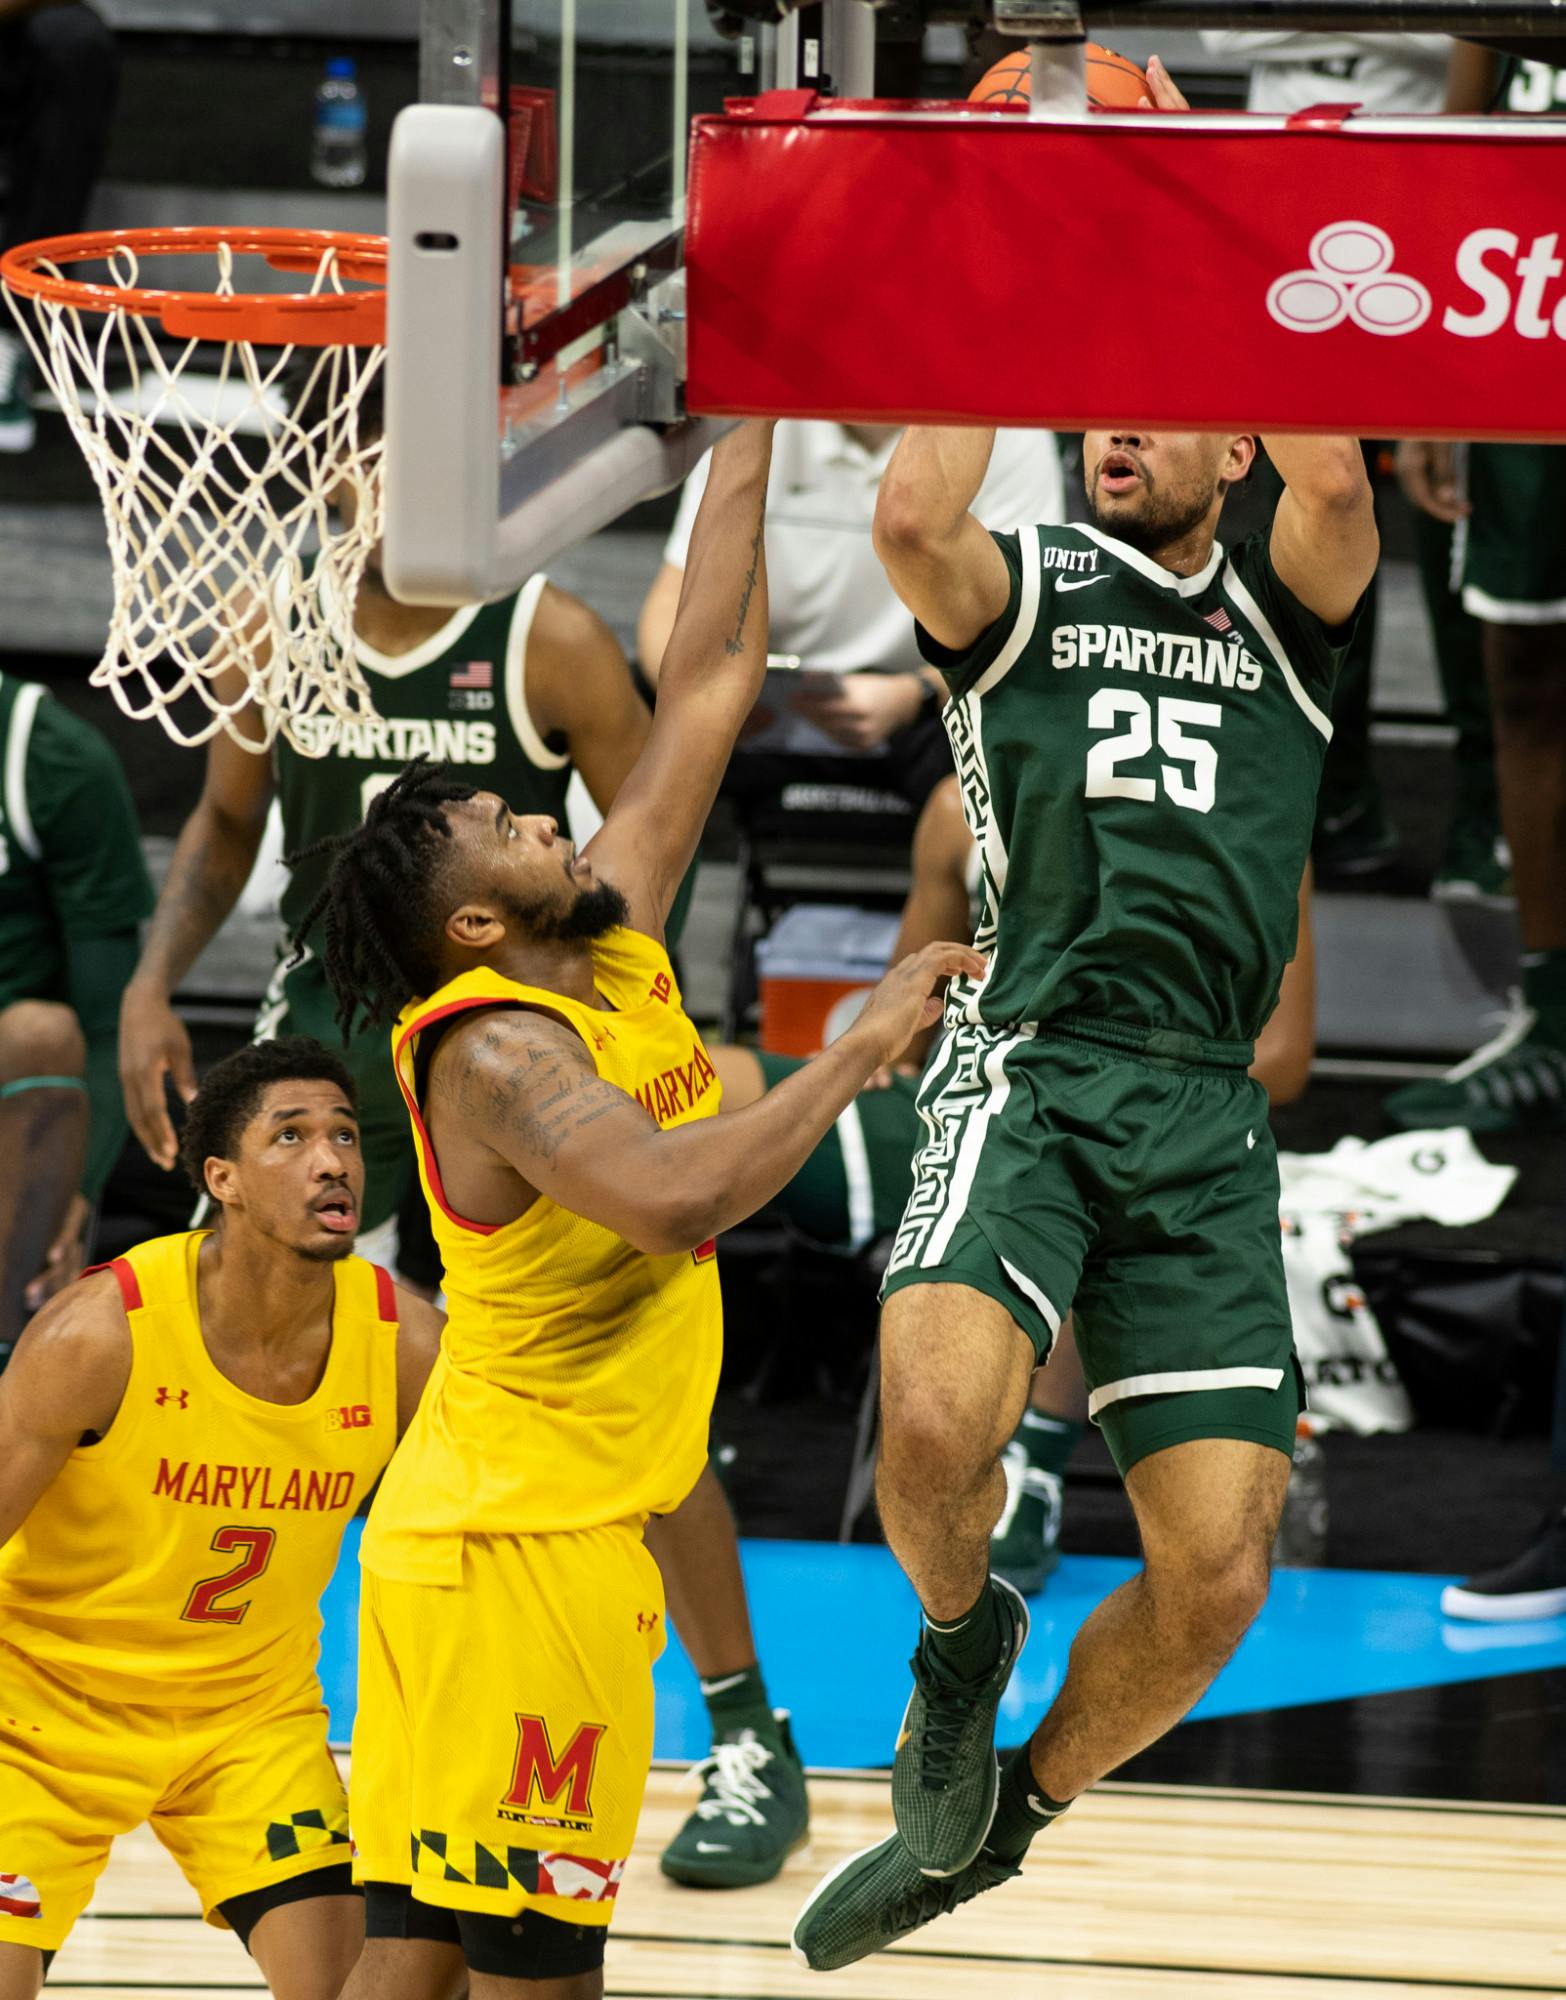 <p>MSU forward Malik Hall, 25, takes a shot in the Big Ten basketball tournament during a game against Maryland on March 11, 2020.</p>